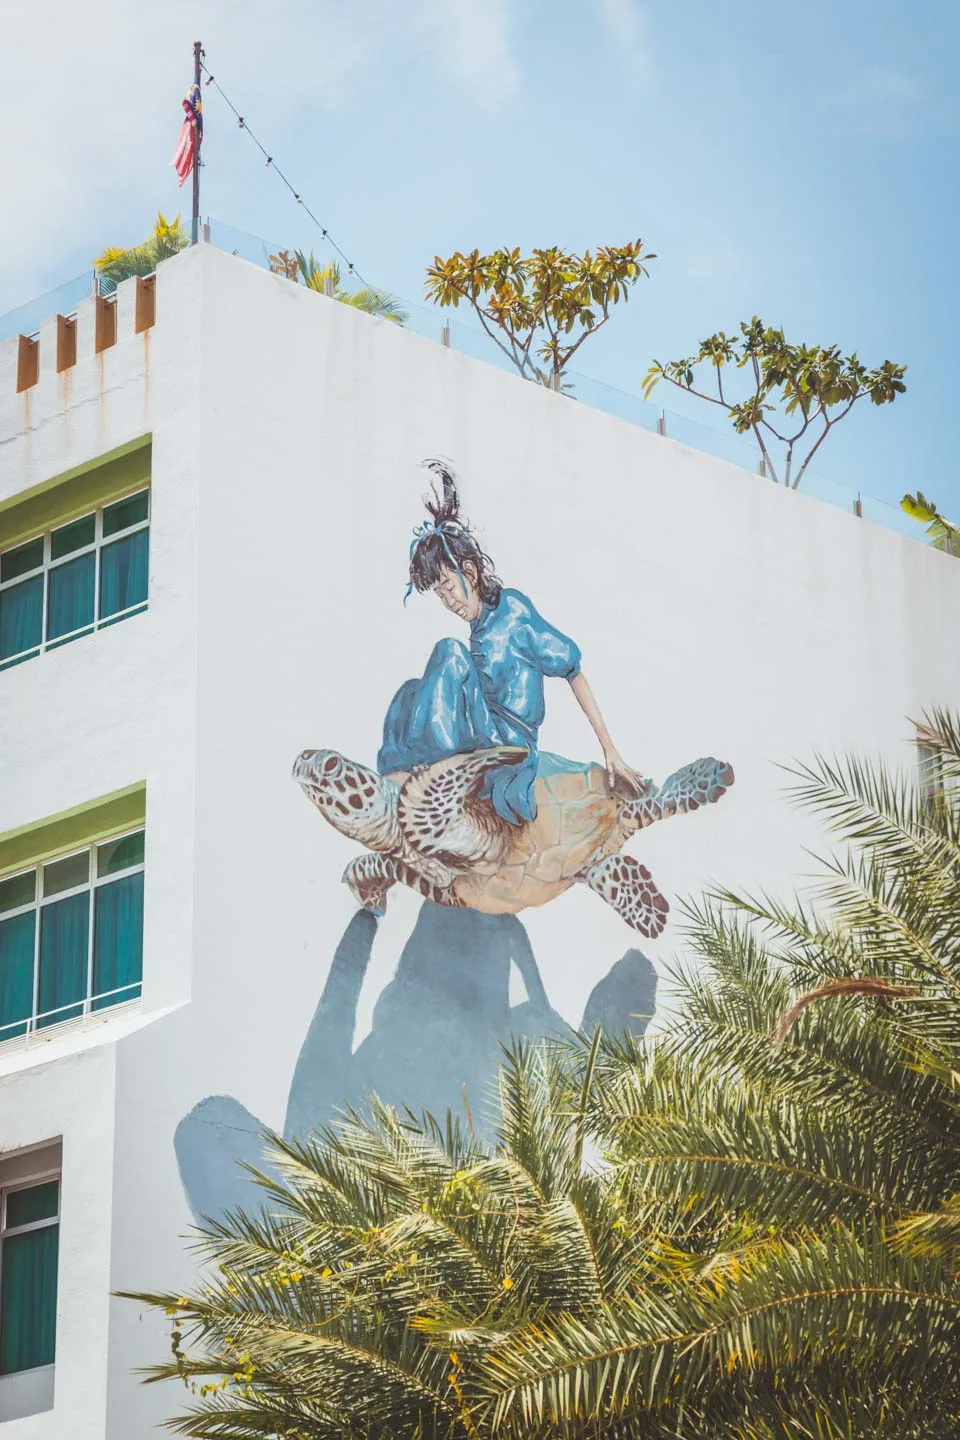 Girl on a turtle, Ernest Zacharevic, Penang Street Art